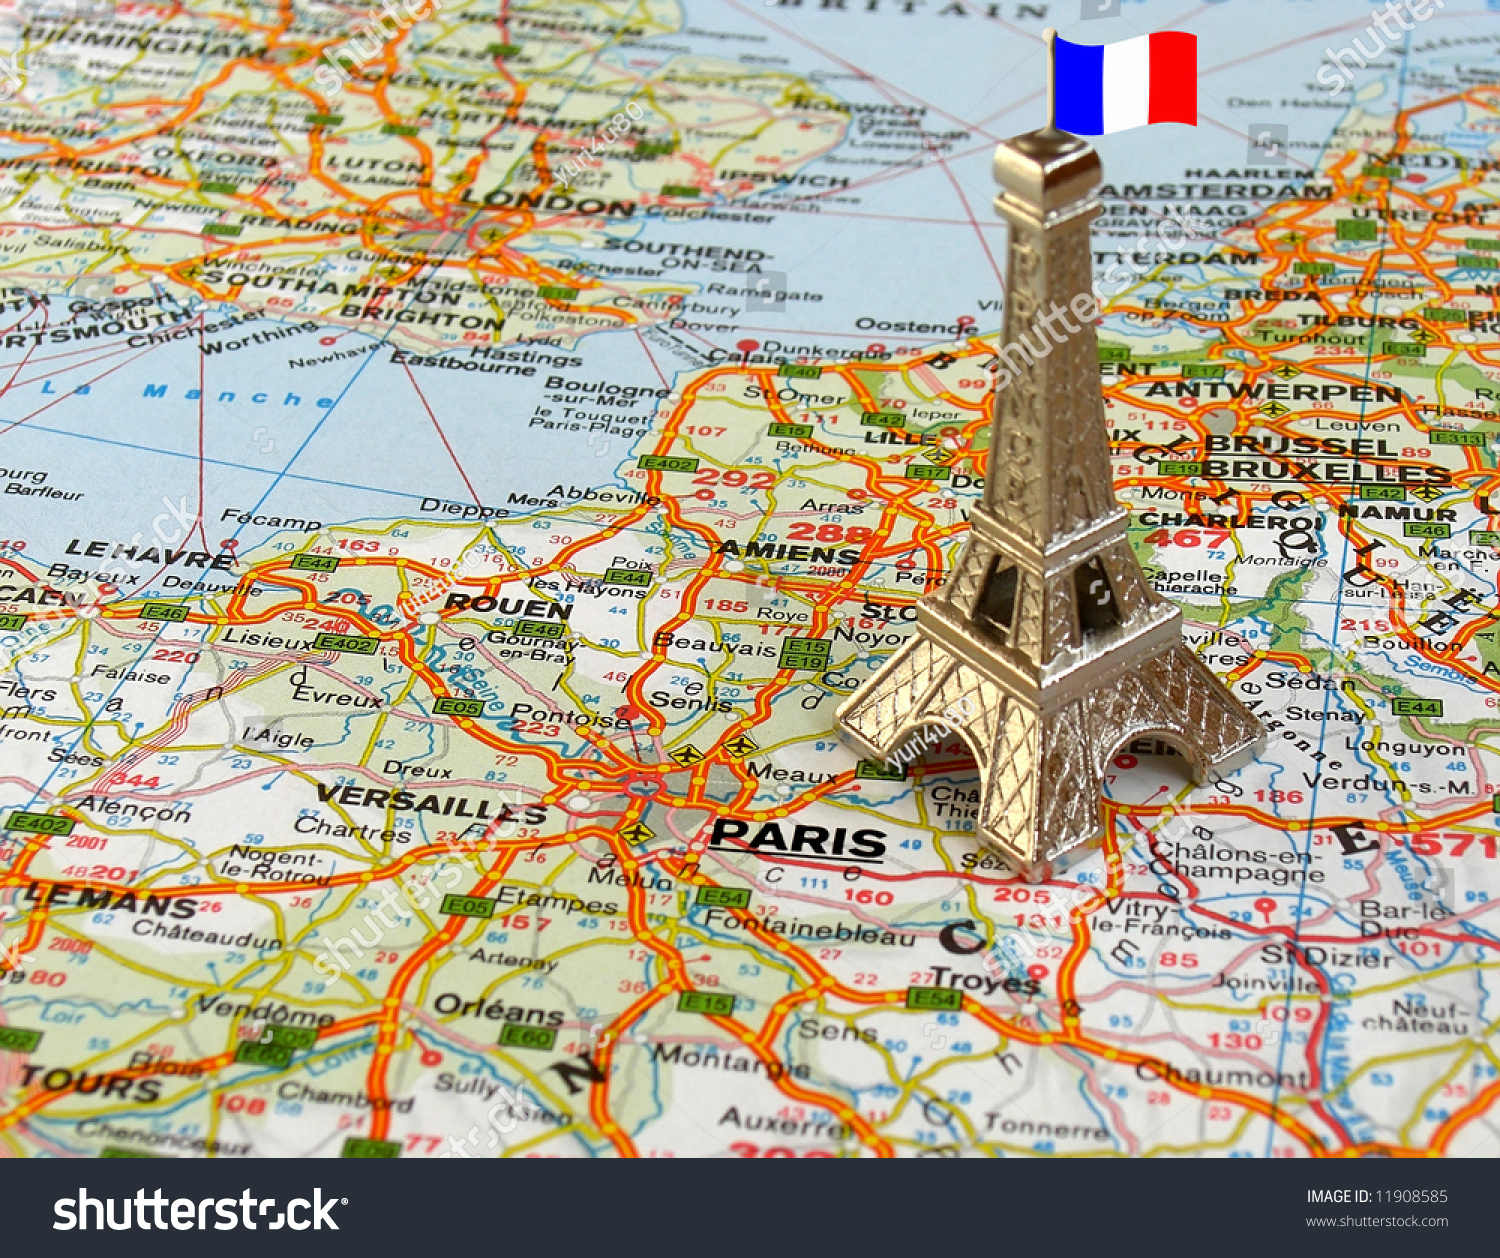 Eiffel Tower On Map France Stock Photo Edit Now 11908585